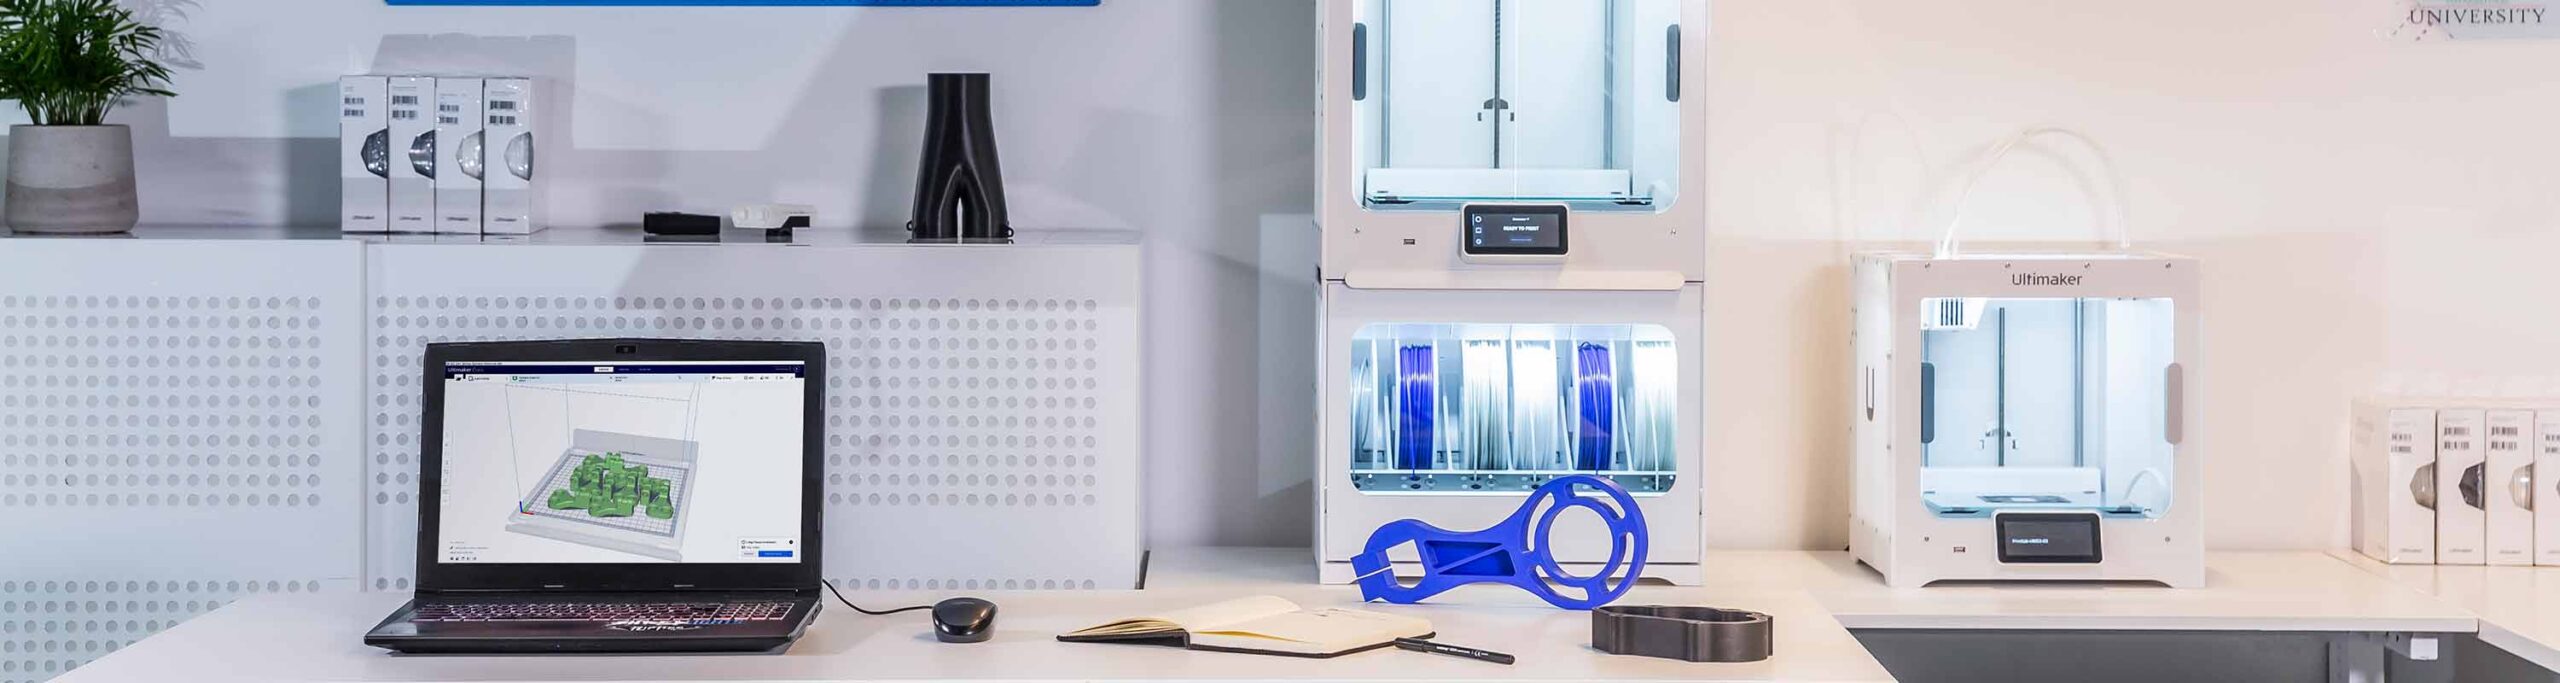 Ultimaker Cura and 3D printers